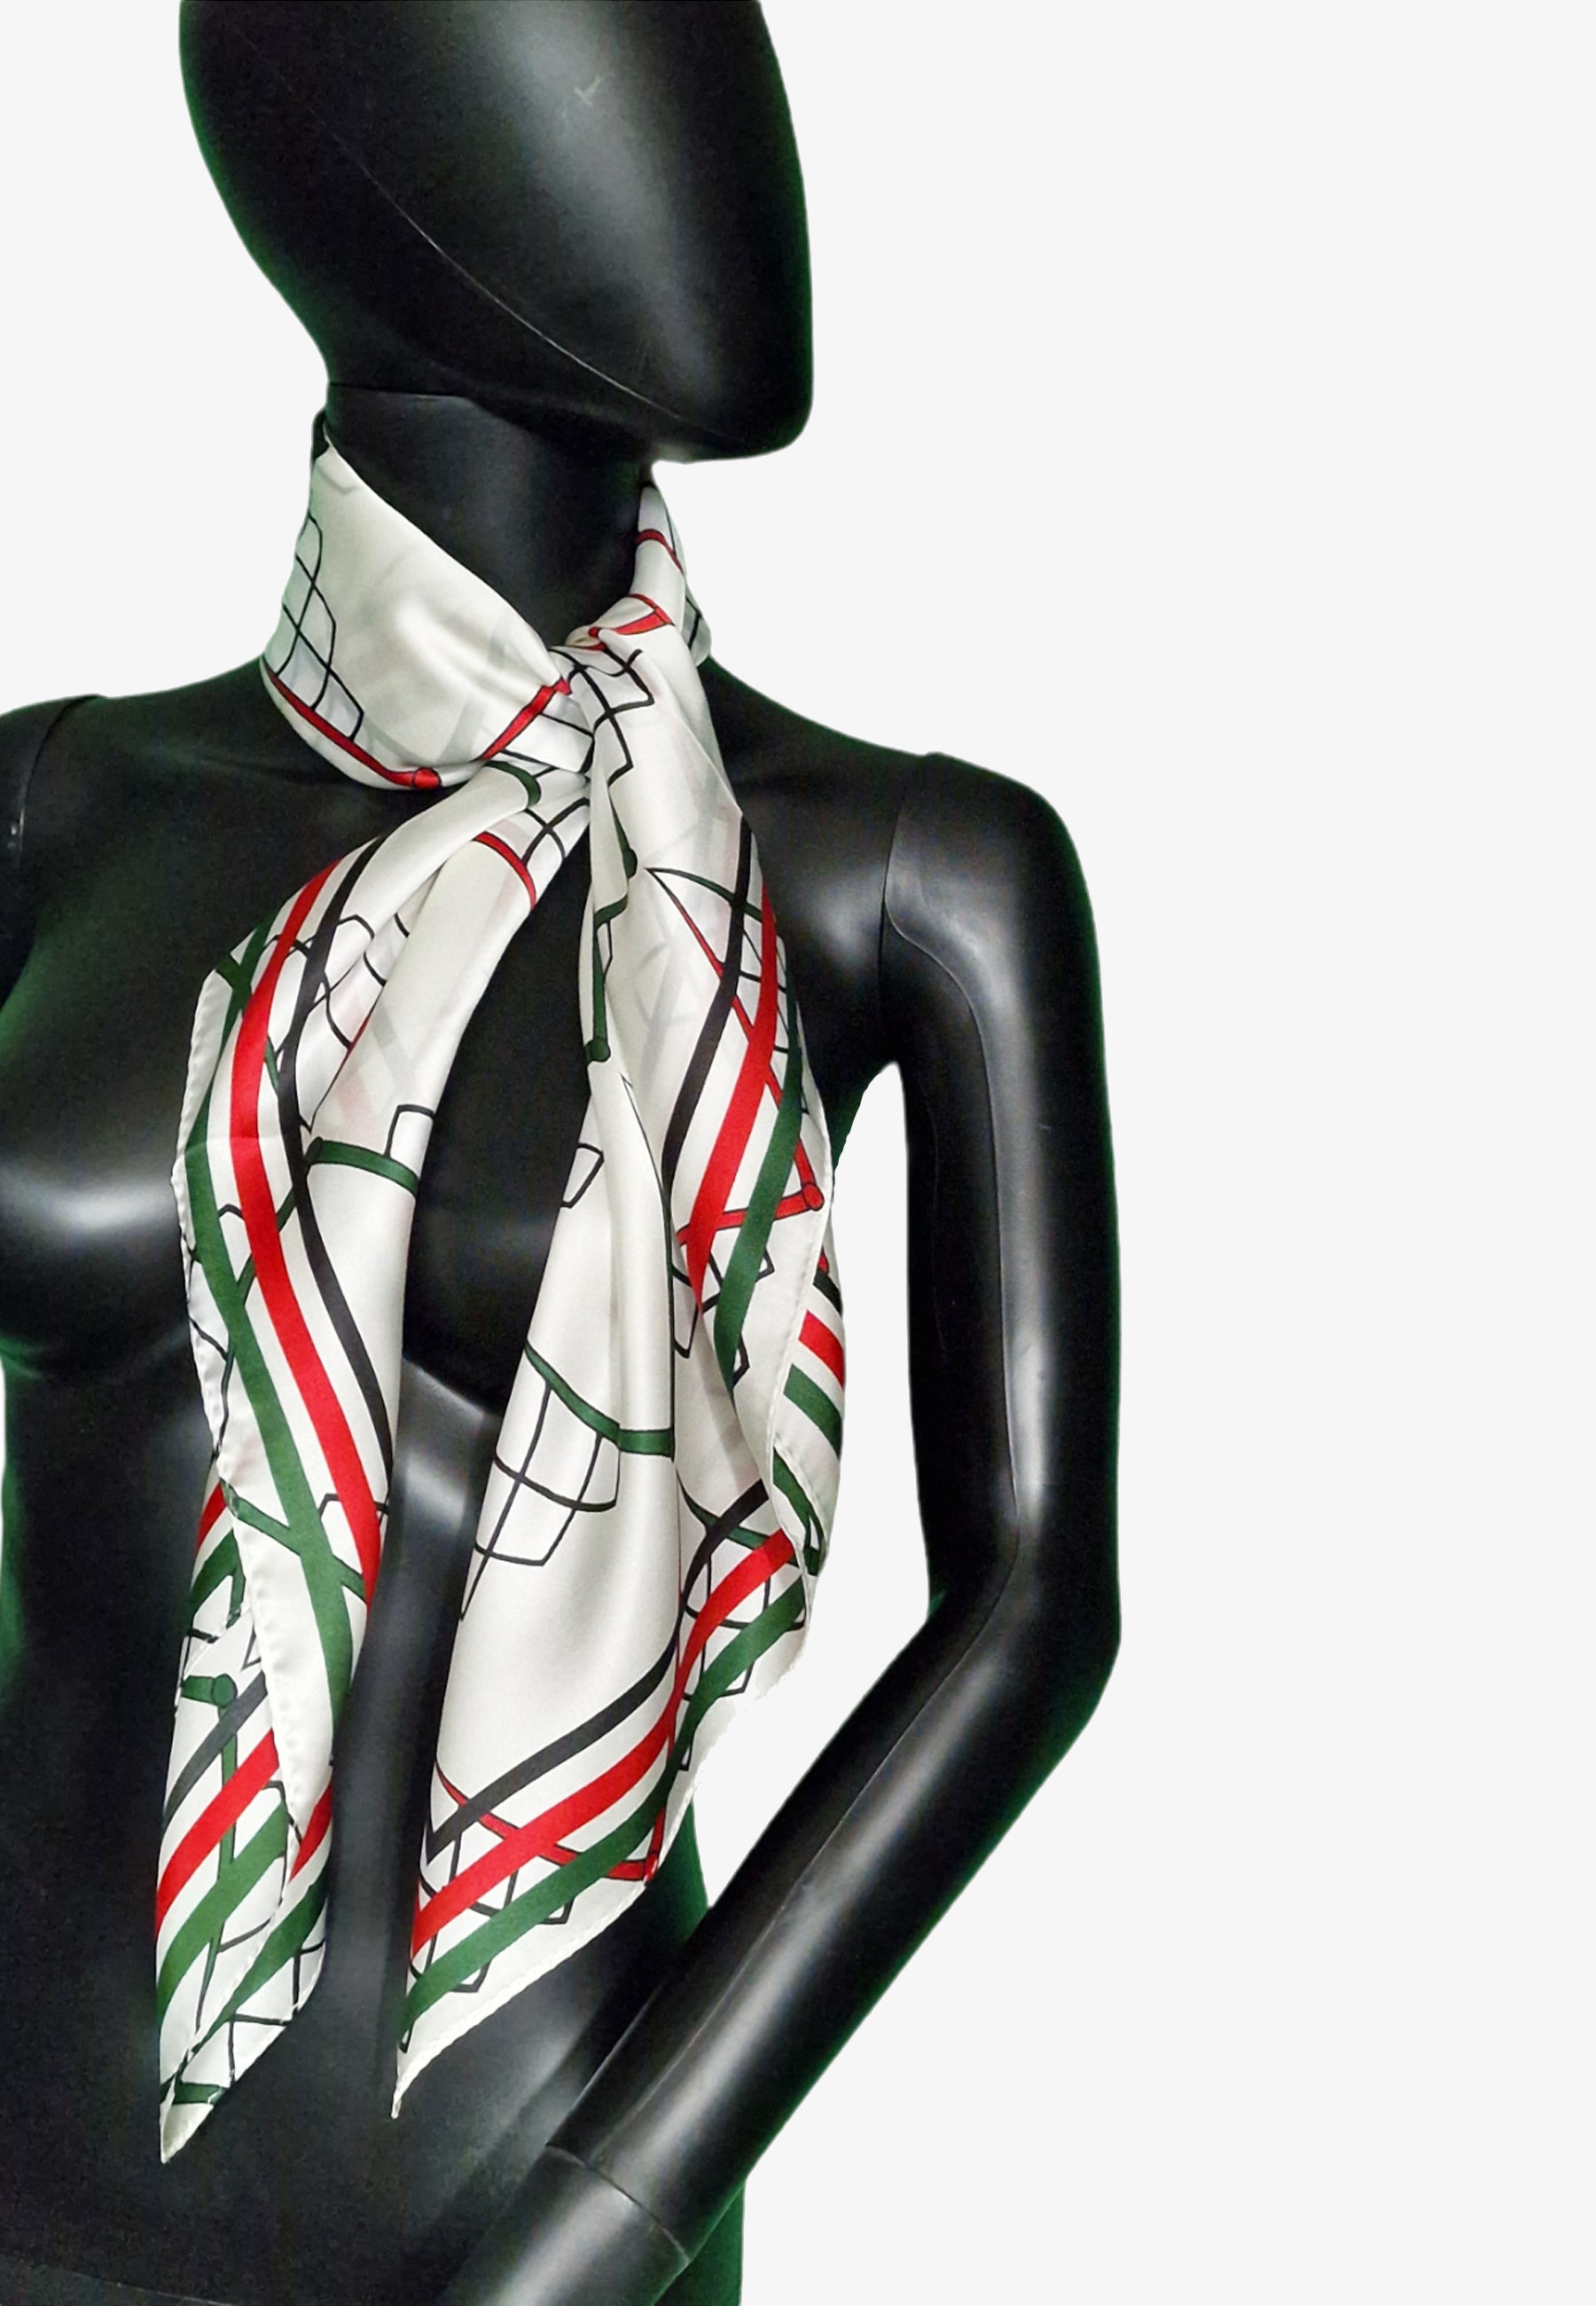 Silk Scarf - Made in Italy - Sustainable fashion - Mode sostenibile made in Italy -Sciarpa seta 